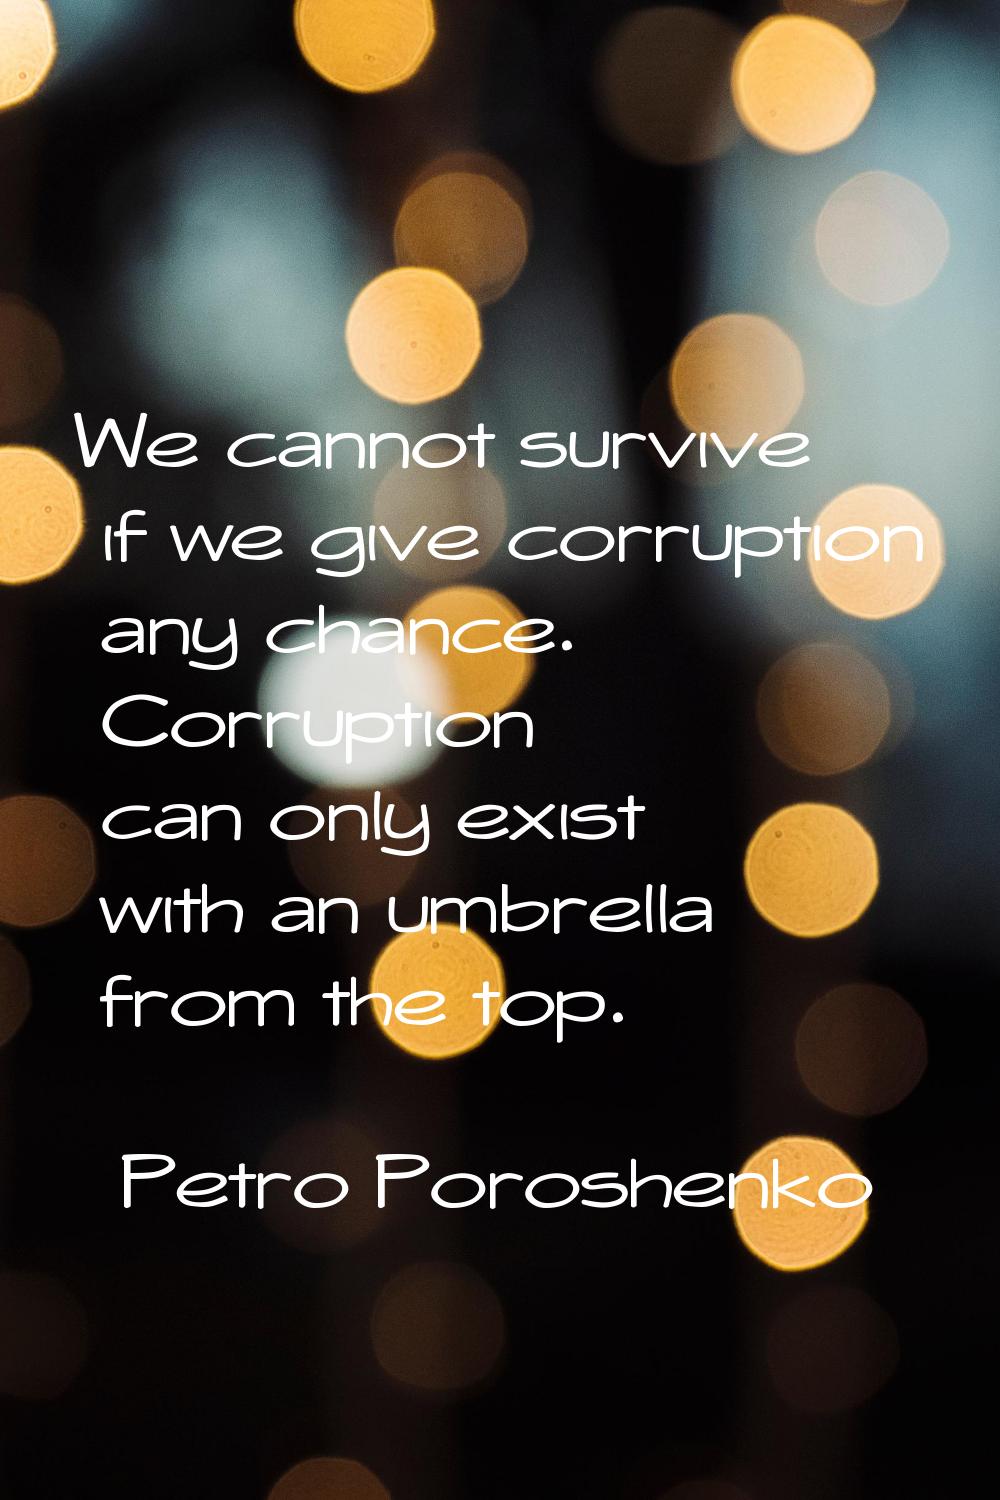 We cannot survive if we give corruption any chance. Corruption can only exist with an umbrella from